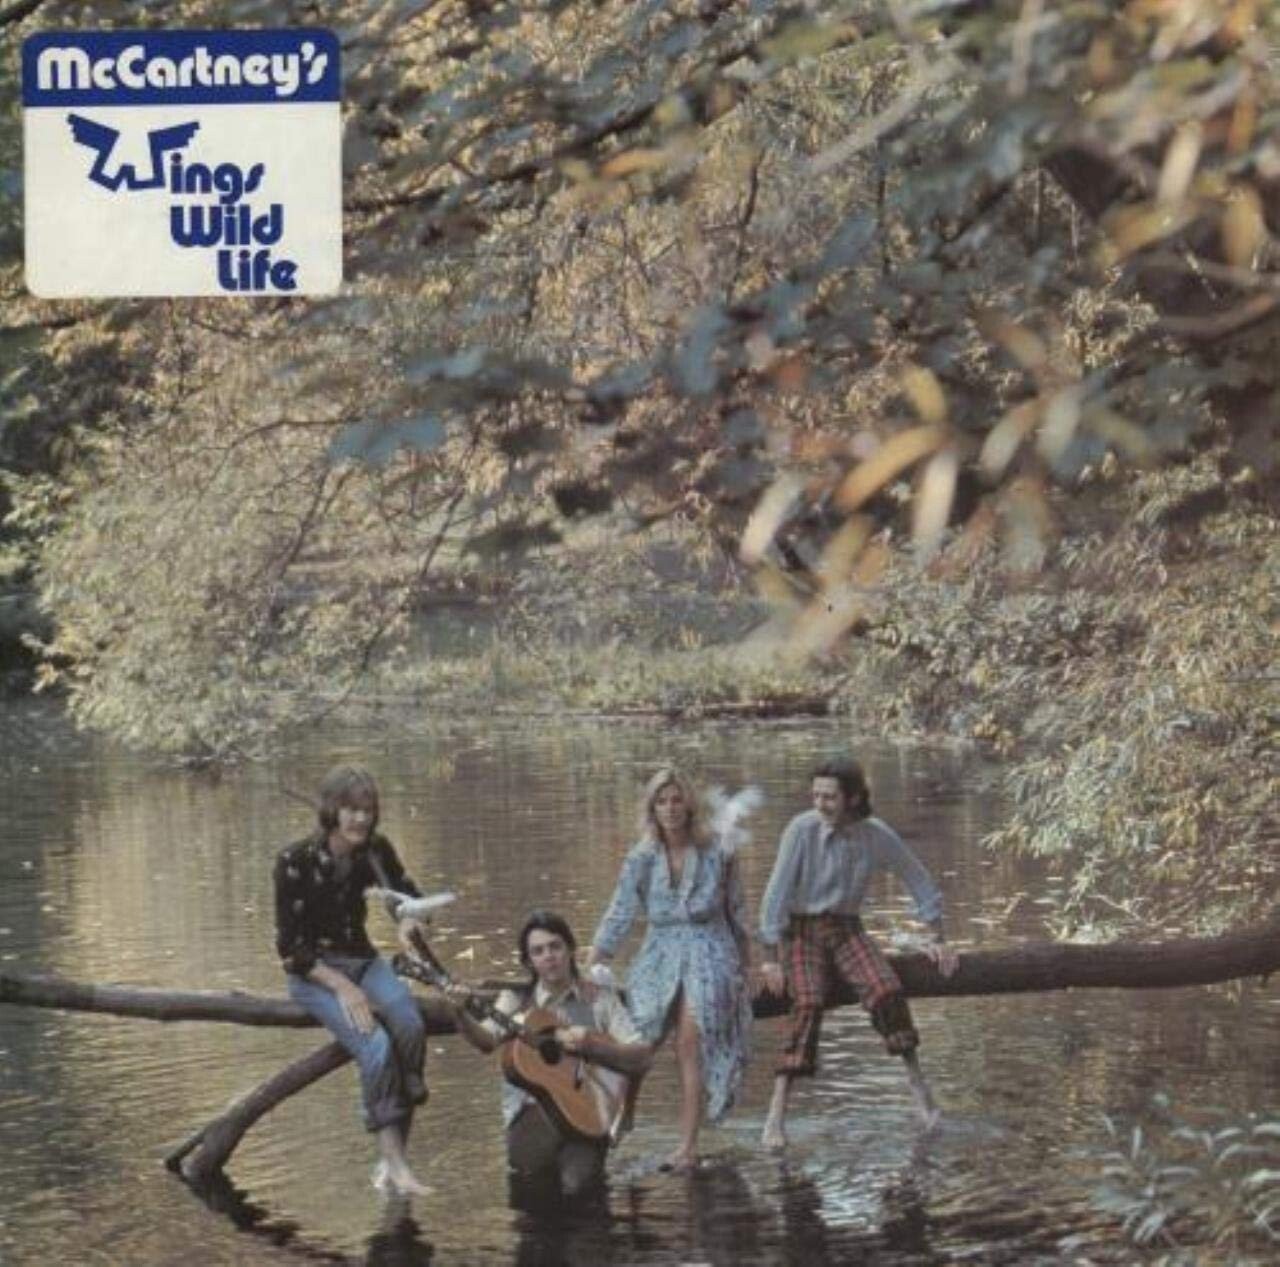 Wild Life album cover of the band sitting on a log across a stream (with Paul holding a guitar in the water)